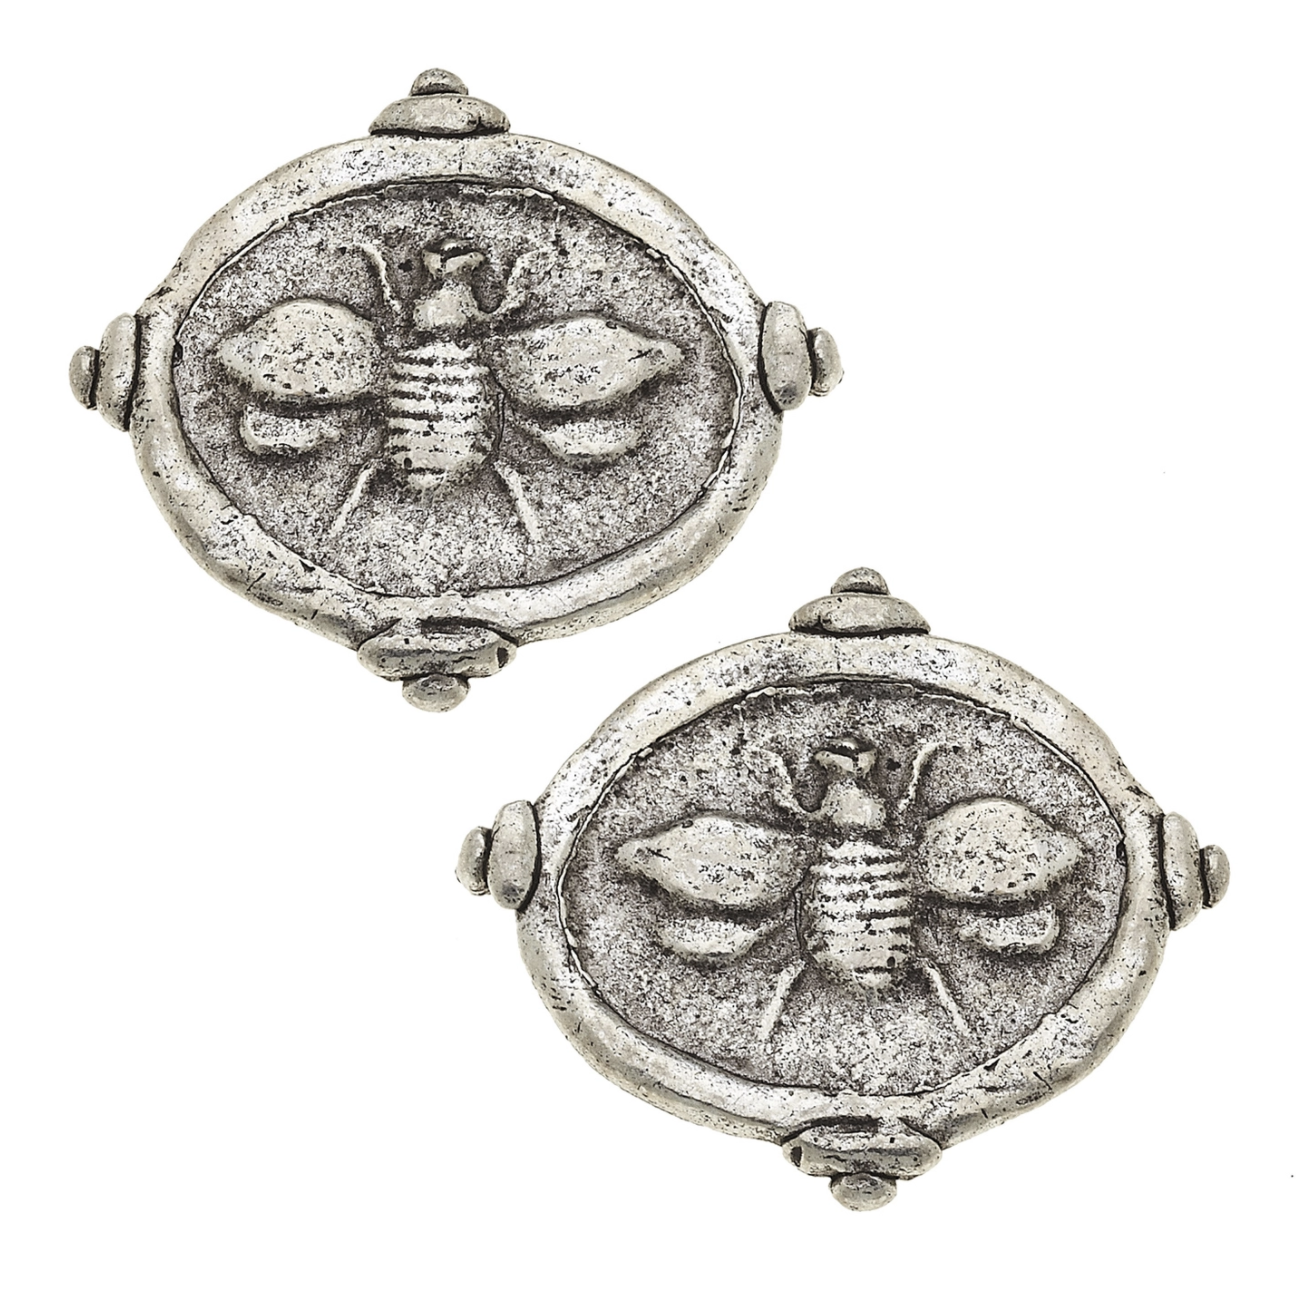 Gold or Silver Bee Clip Earrings